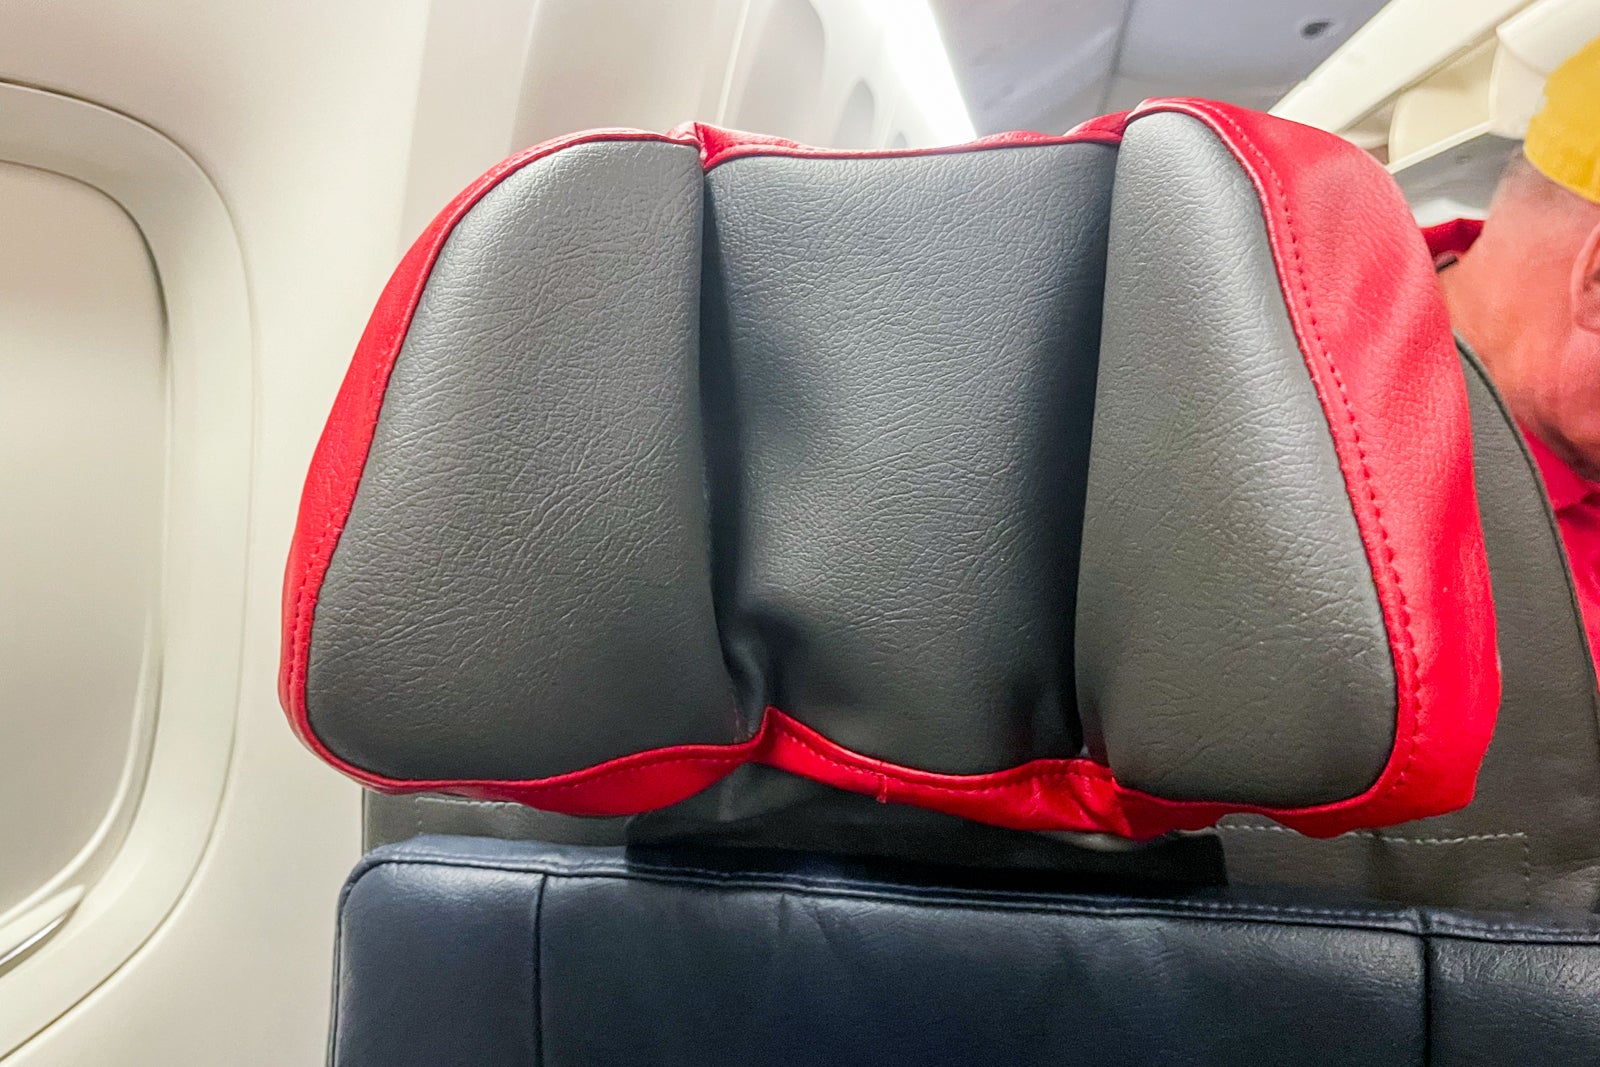 Curling headrest on American Airlines